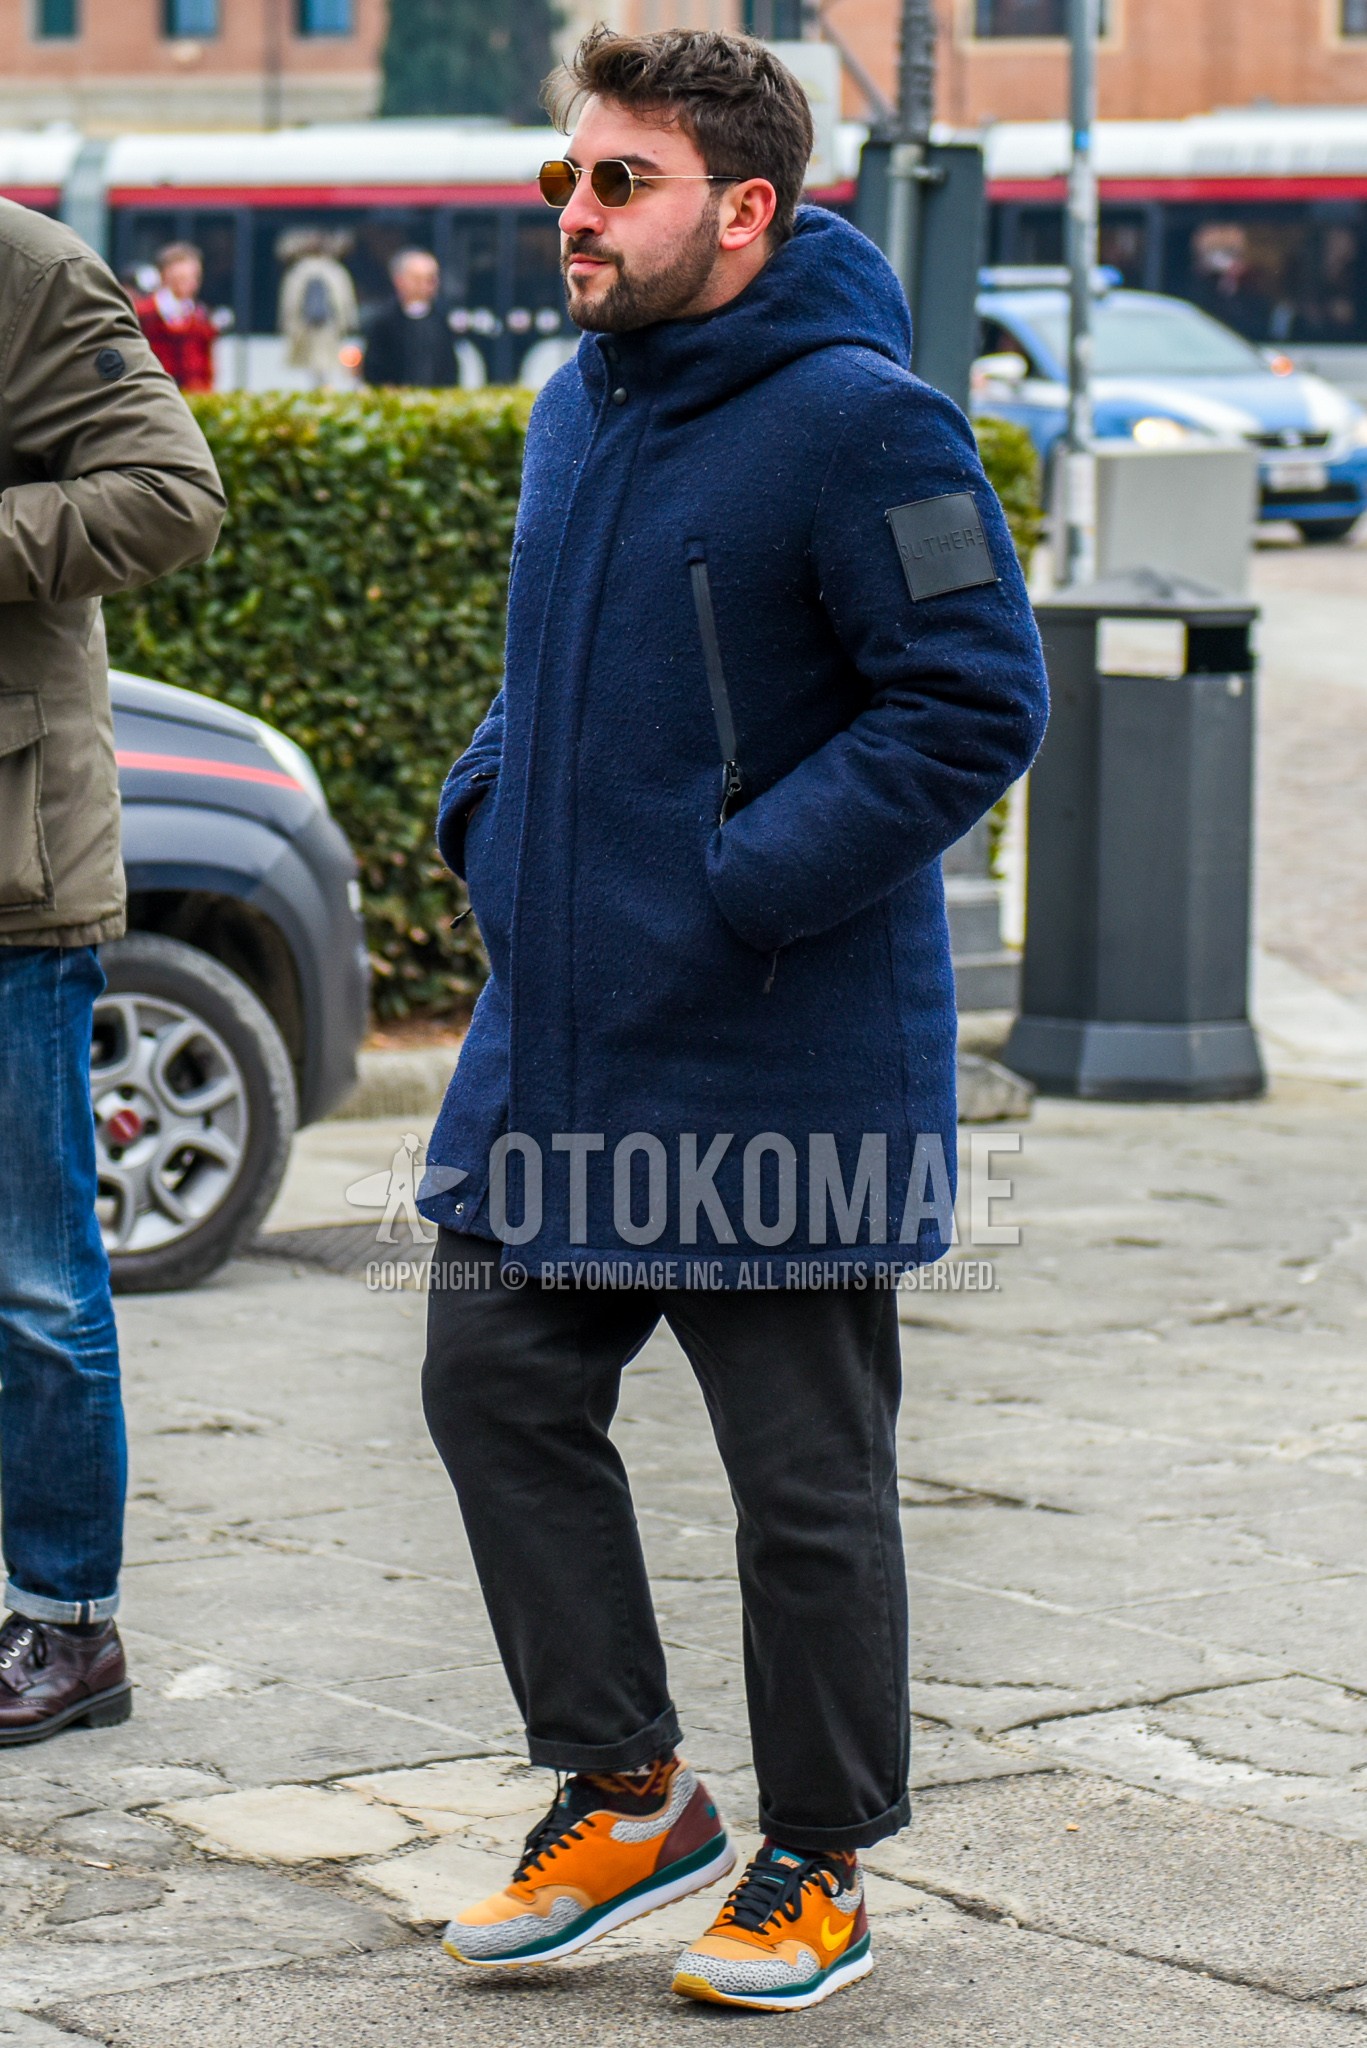 Men's winter outfit with gold plain sunglasses, navy plain hooded coat, gray plain chinos, multi-color low-cut sneakers.